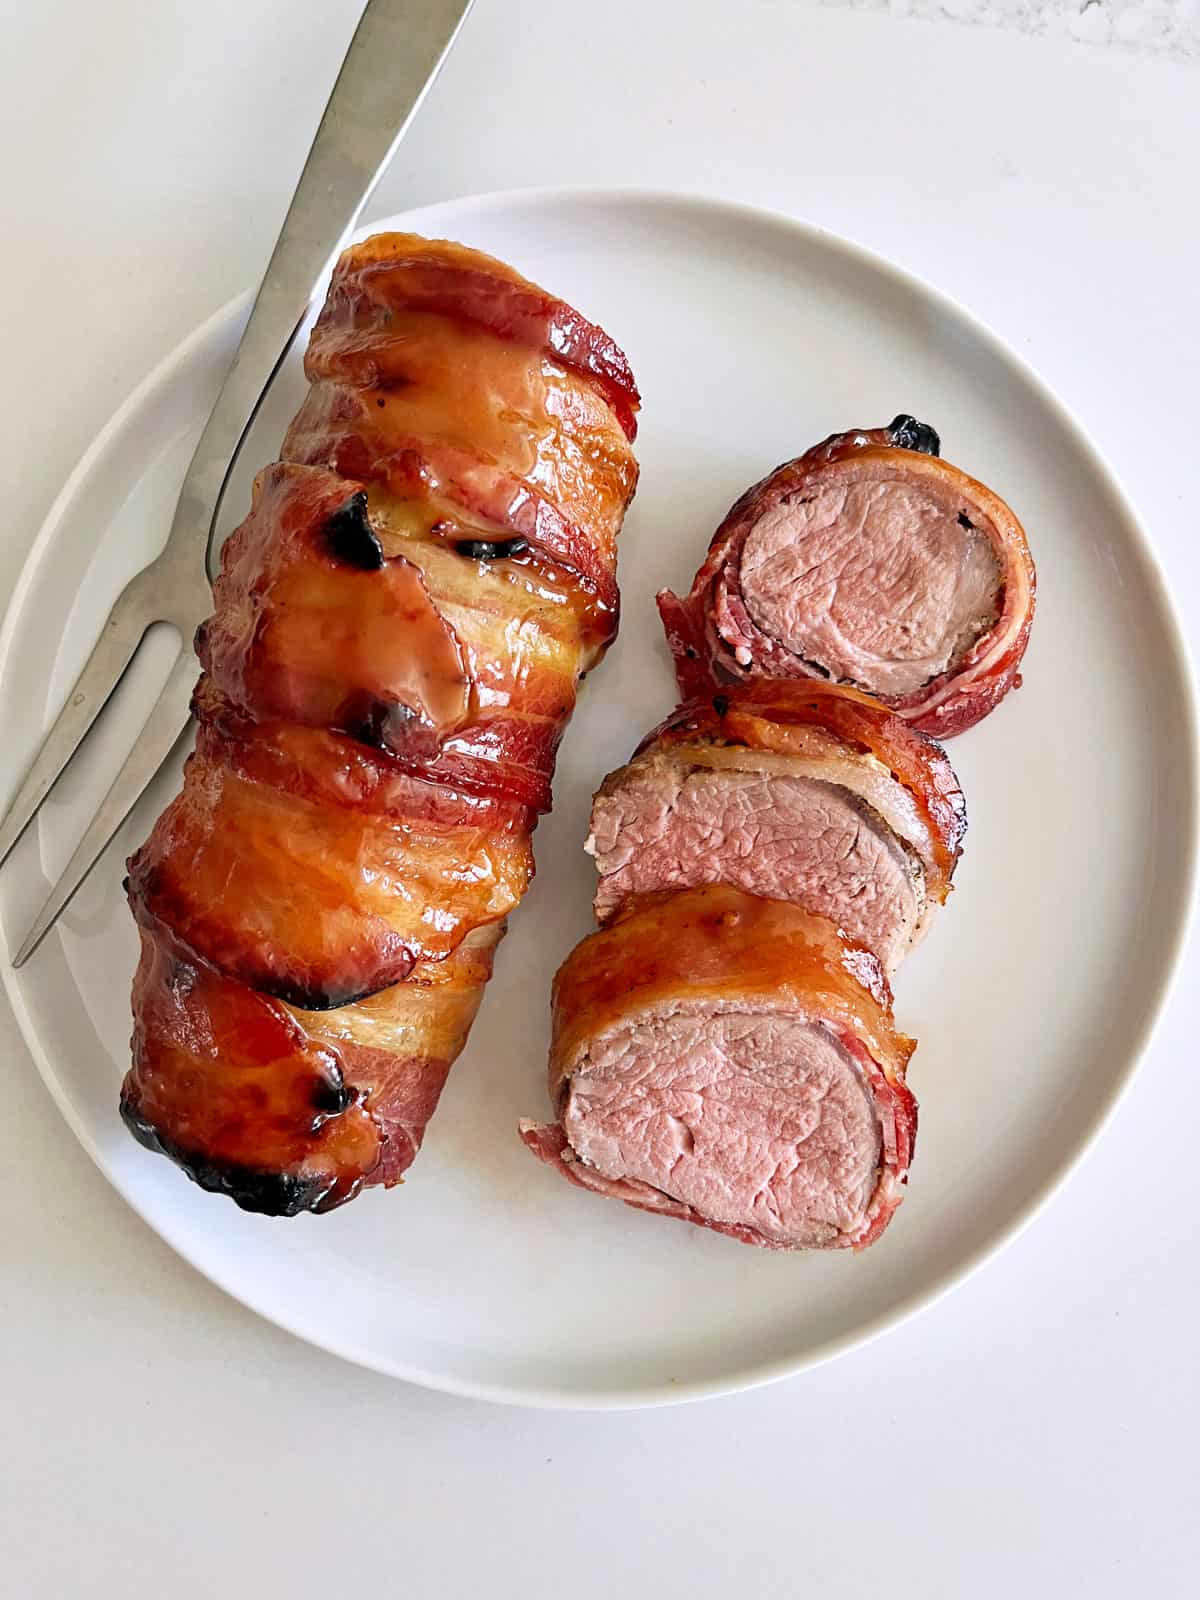 Bacon-wrapped pork tenderloin is served on a white plate.